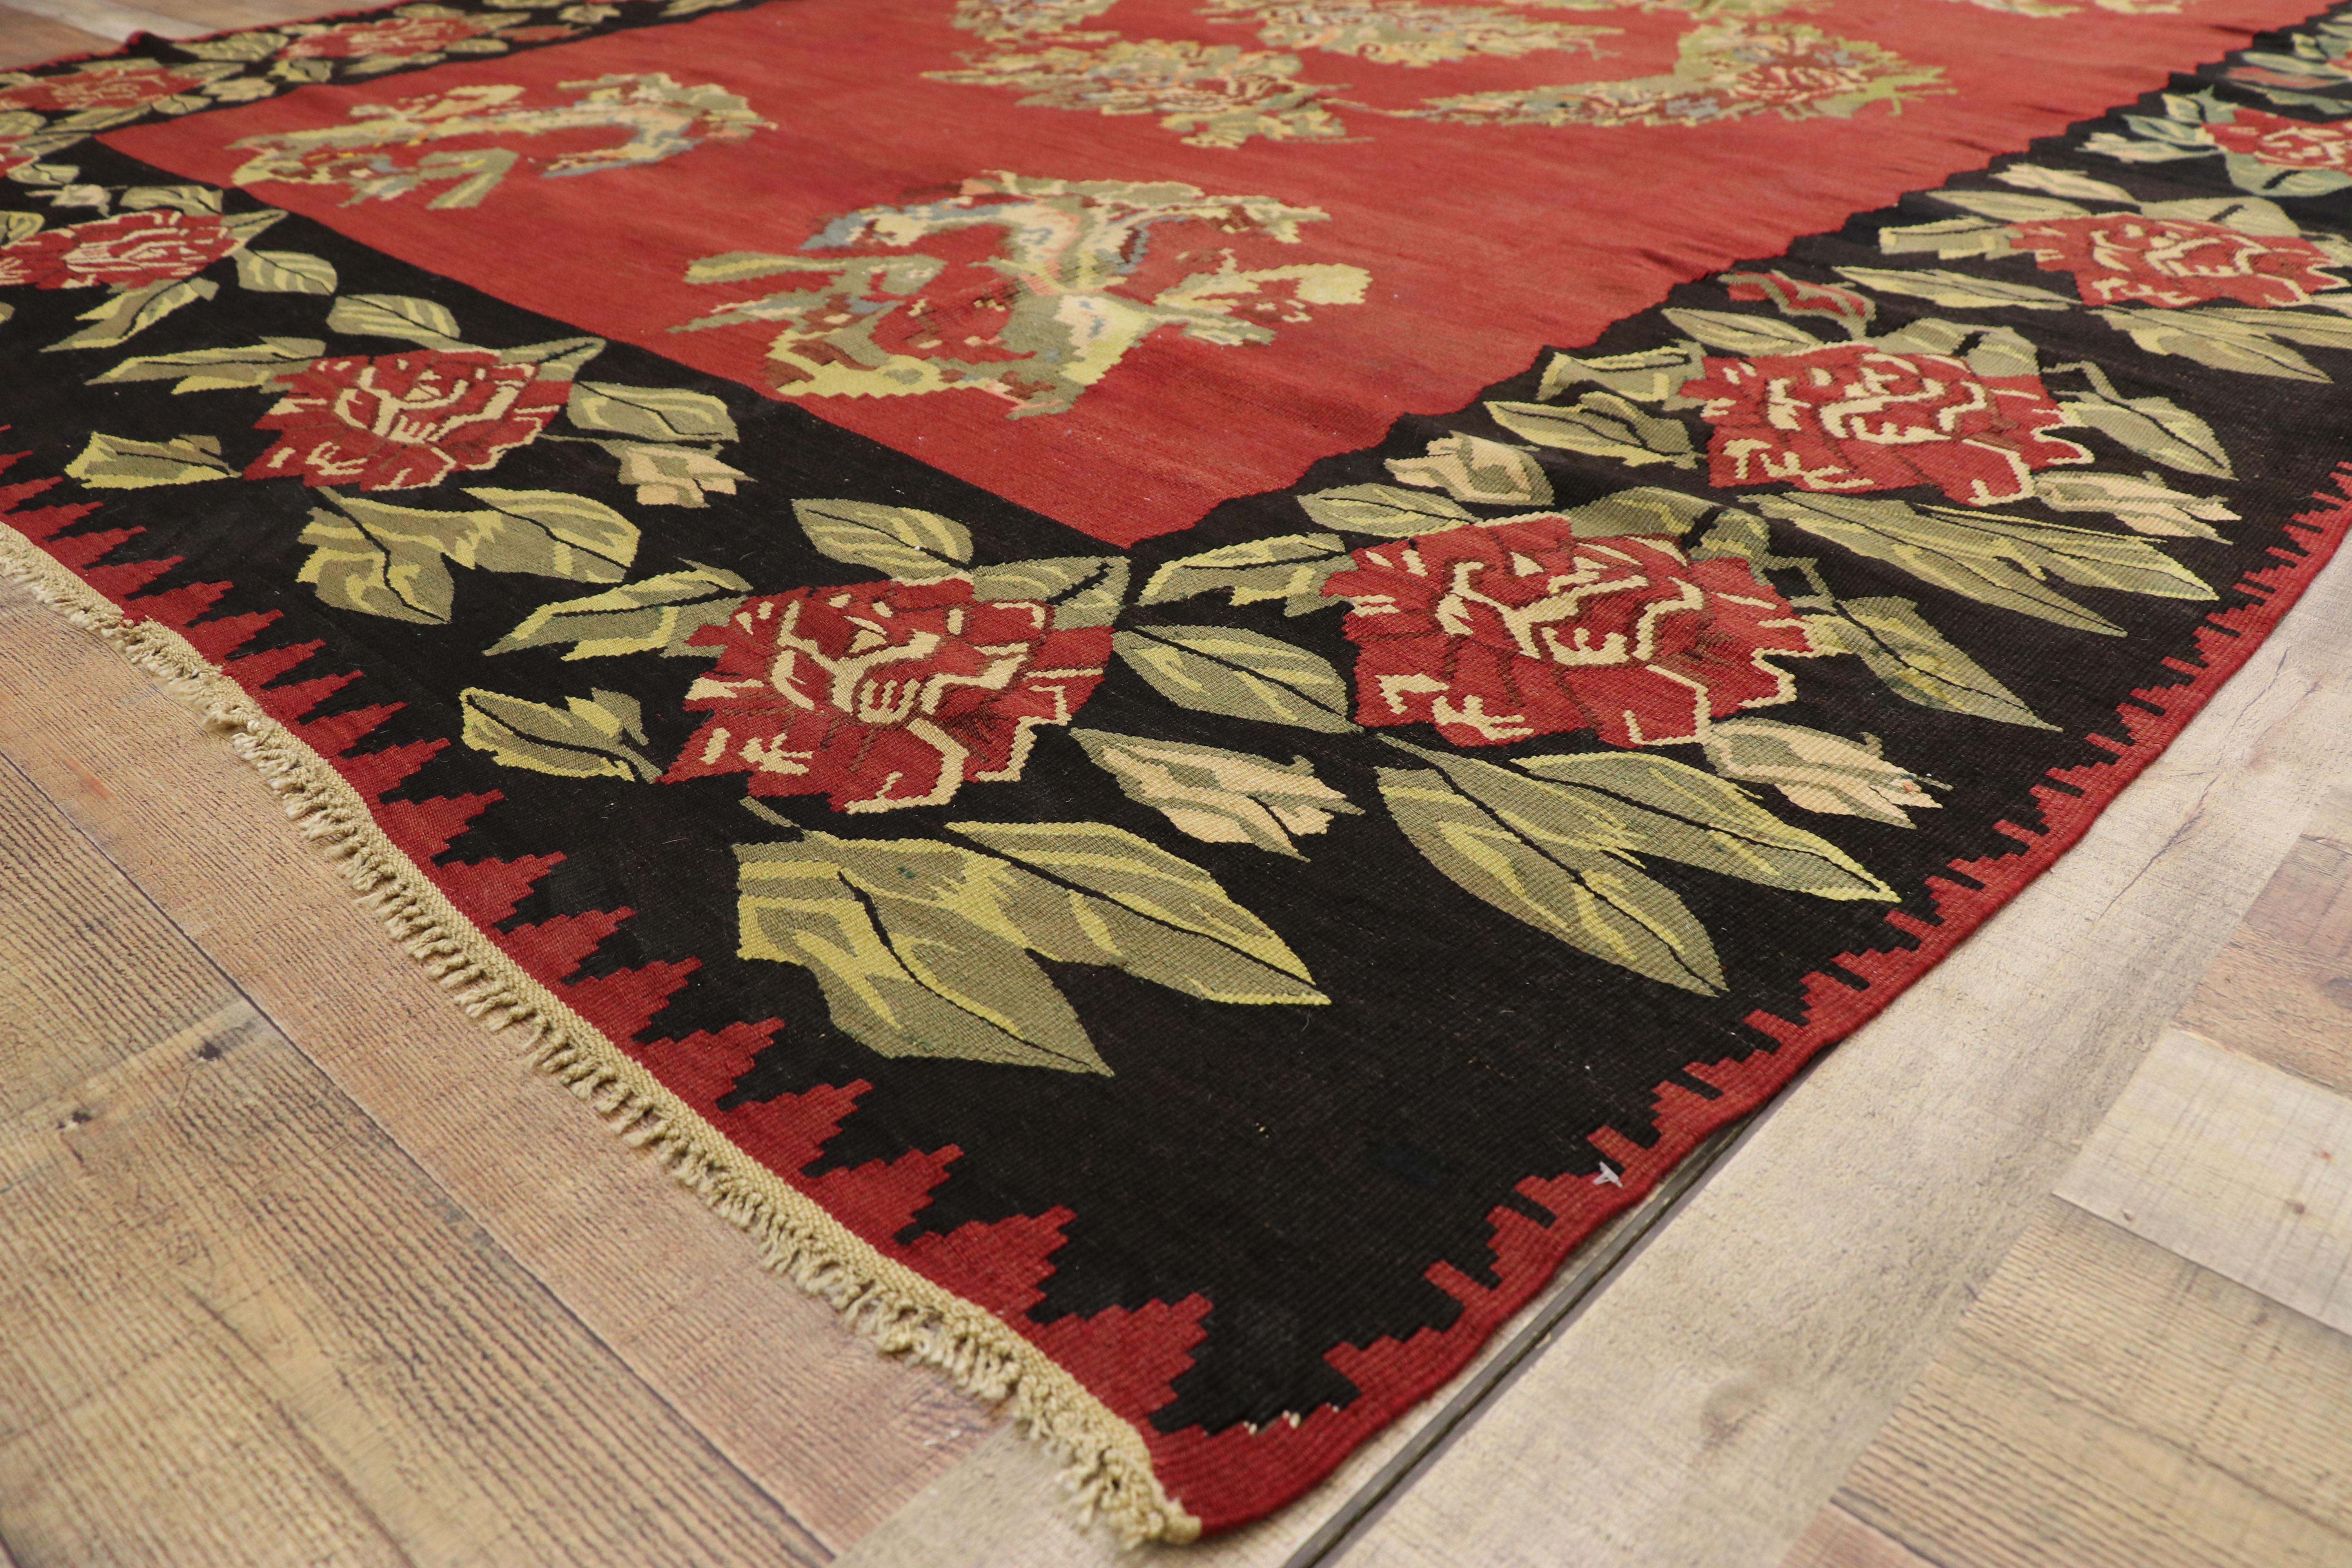 Hand-Woven Vintage Floral Turkish Kilim Rug with Chintz Style and Bessarabian Rose Design For Sale